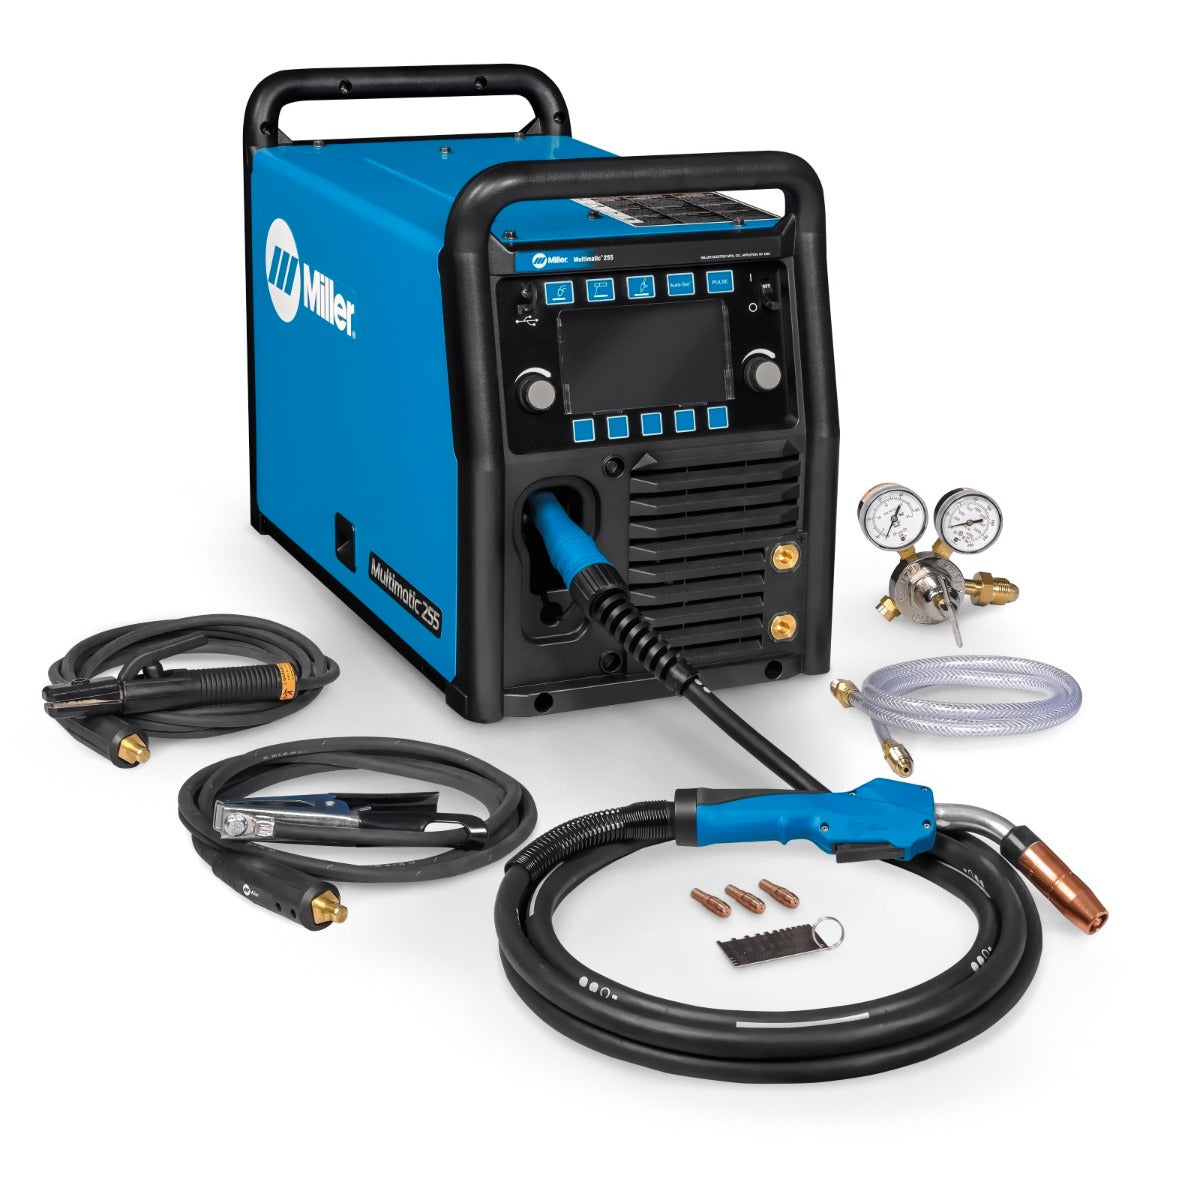 Miller Multimatic 255 Pulsed Multiprocess Welder w/Running Gear and TIG Kit (951768)